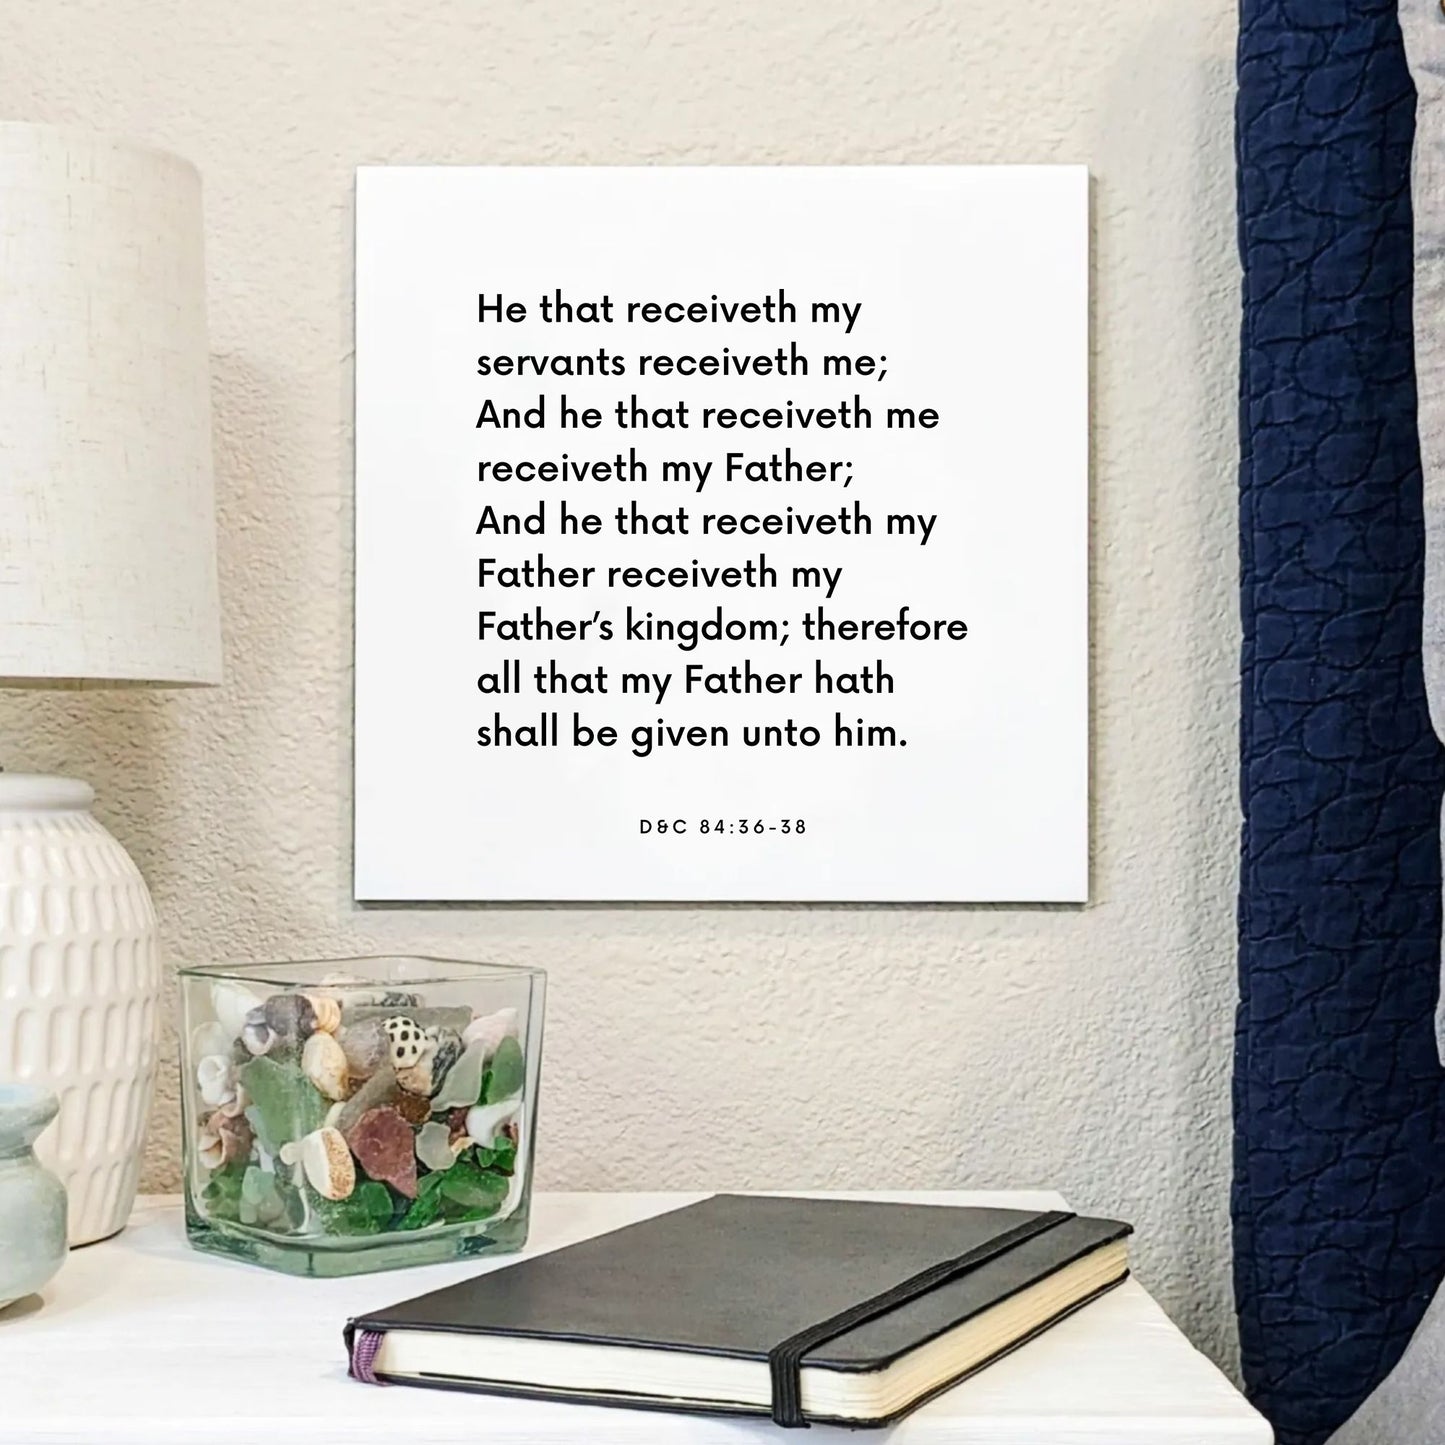 Bedside mouting of the scripture tile for D&C 84:36-38 - "He that receiveth my servants receiveth me"